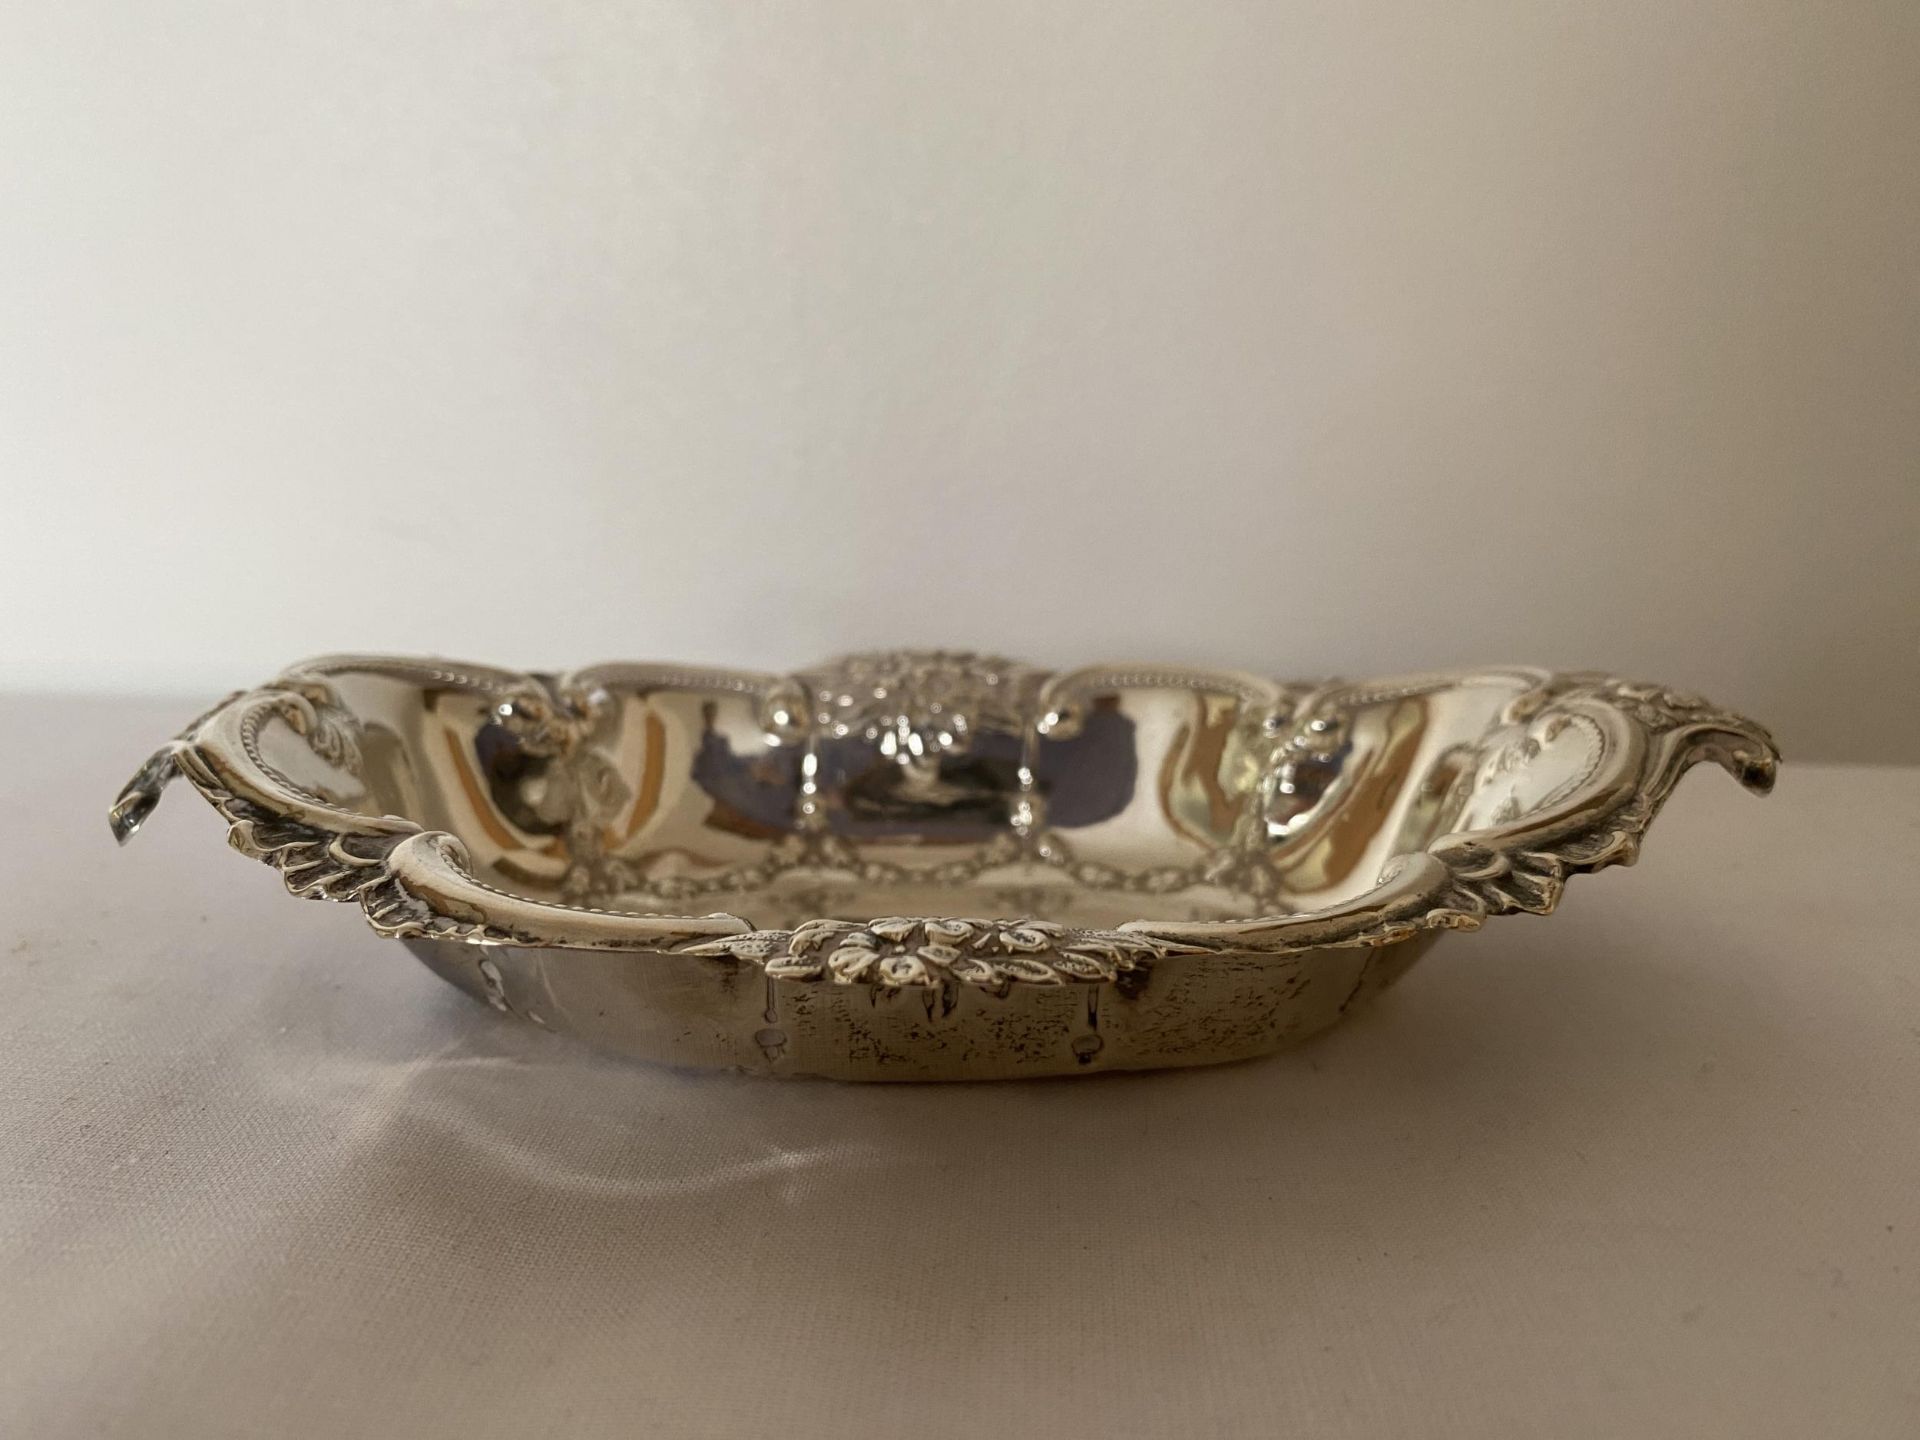 A 1901 HALLMARKED CHESTER SILVER DISH, MAKER GEORGE NATHAN & RIDLEY HAYES, GROSS WEIGHT 27 GRAMS - Image 9 of 21